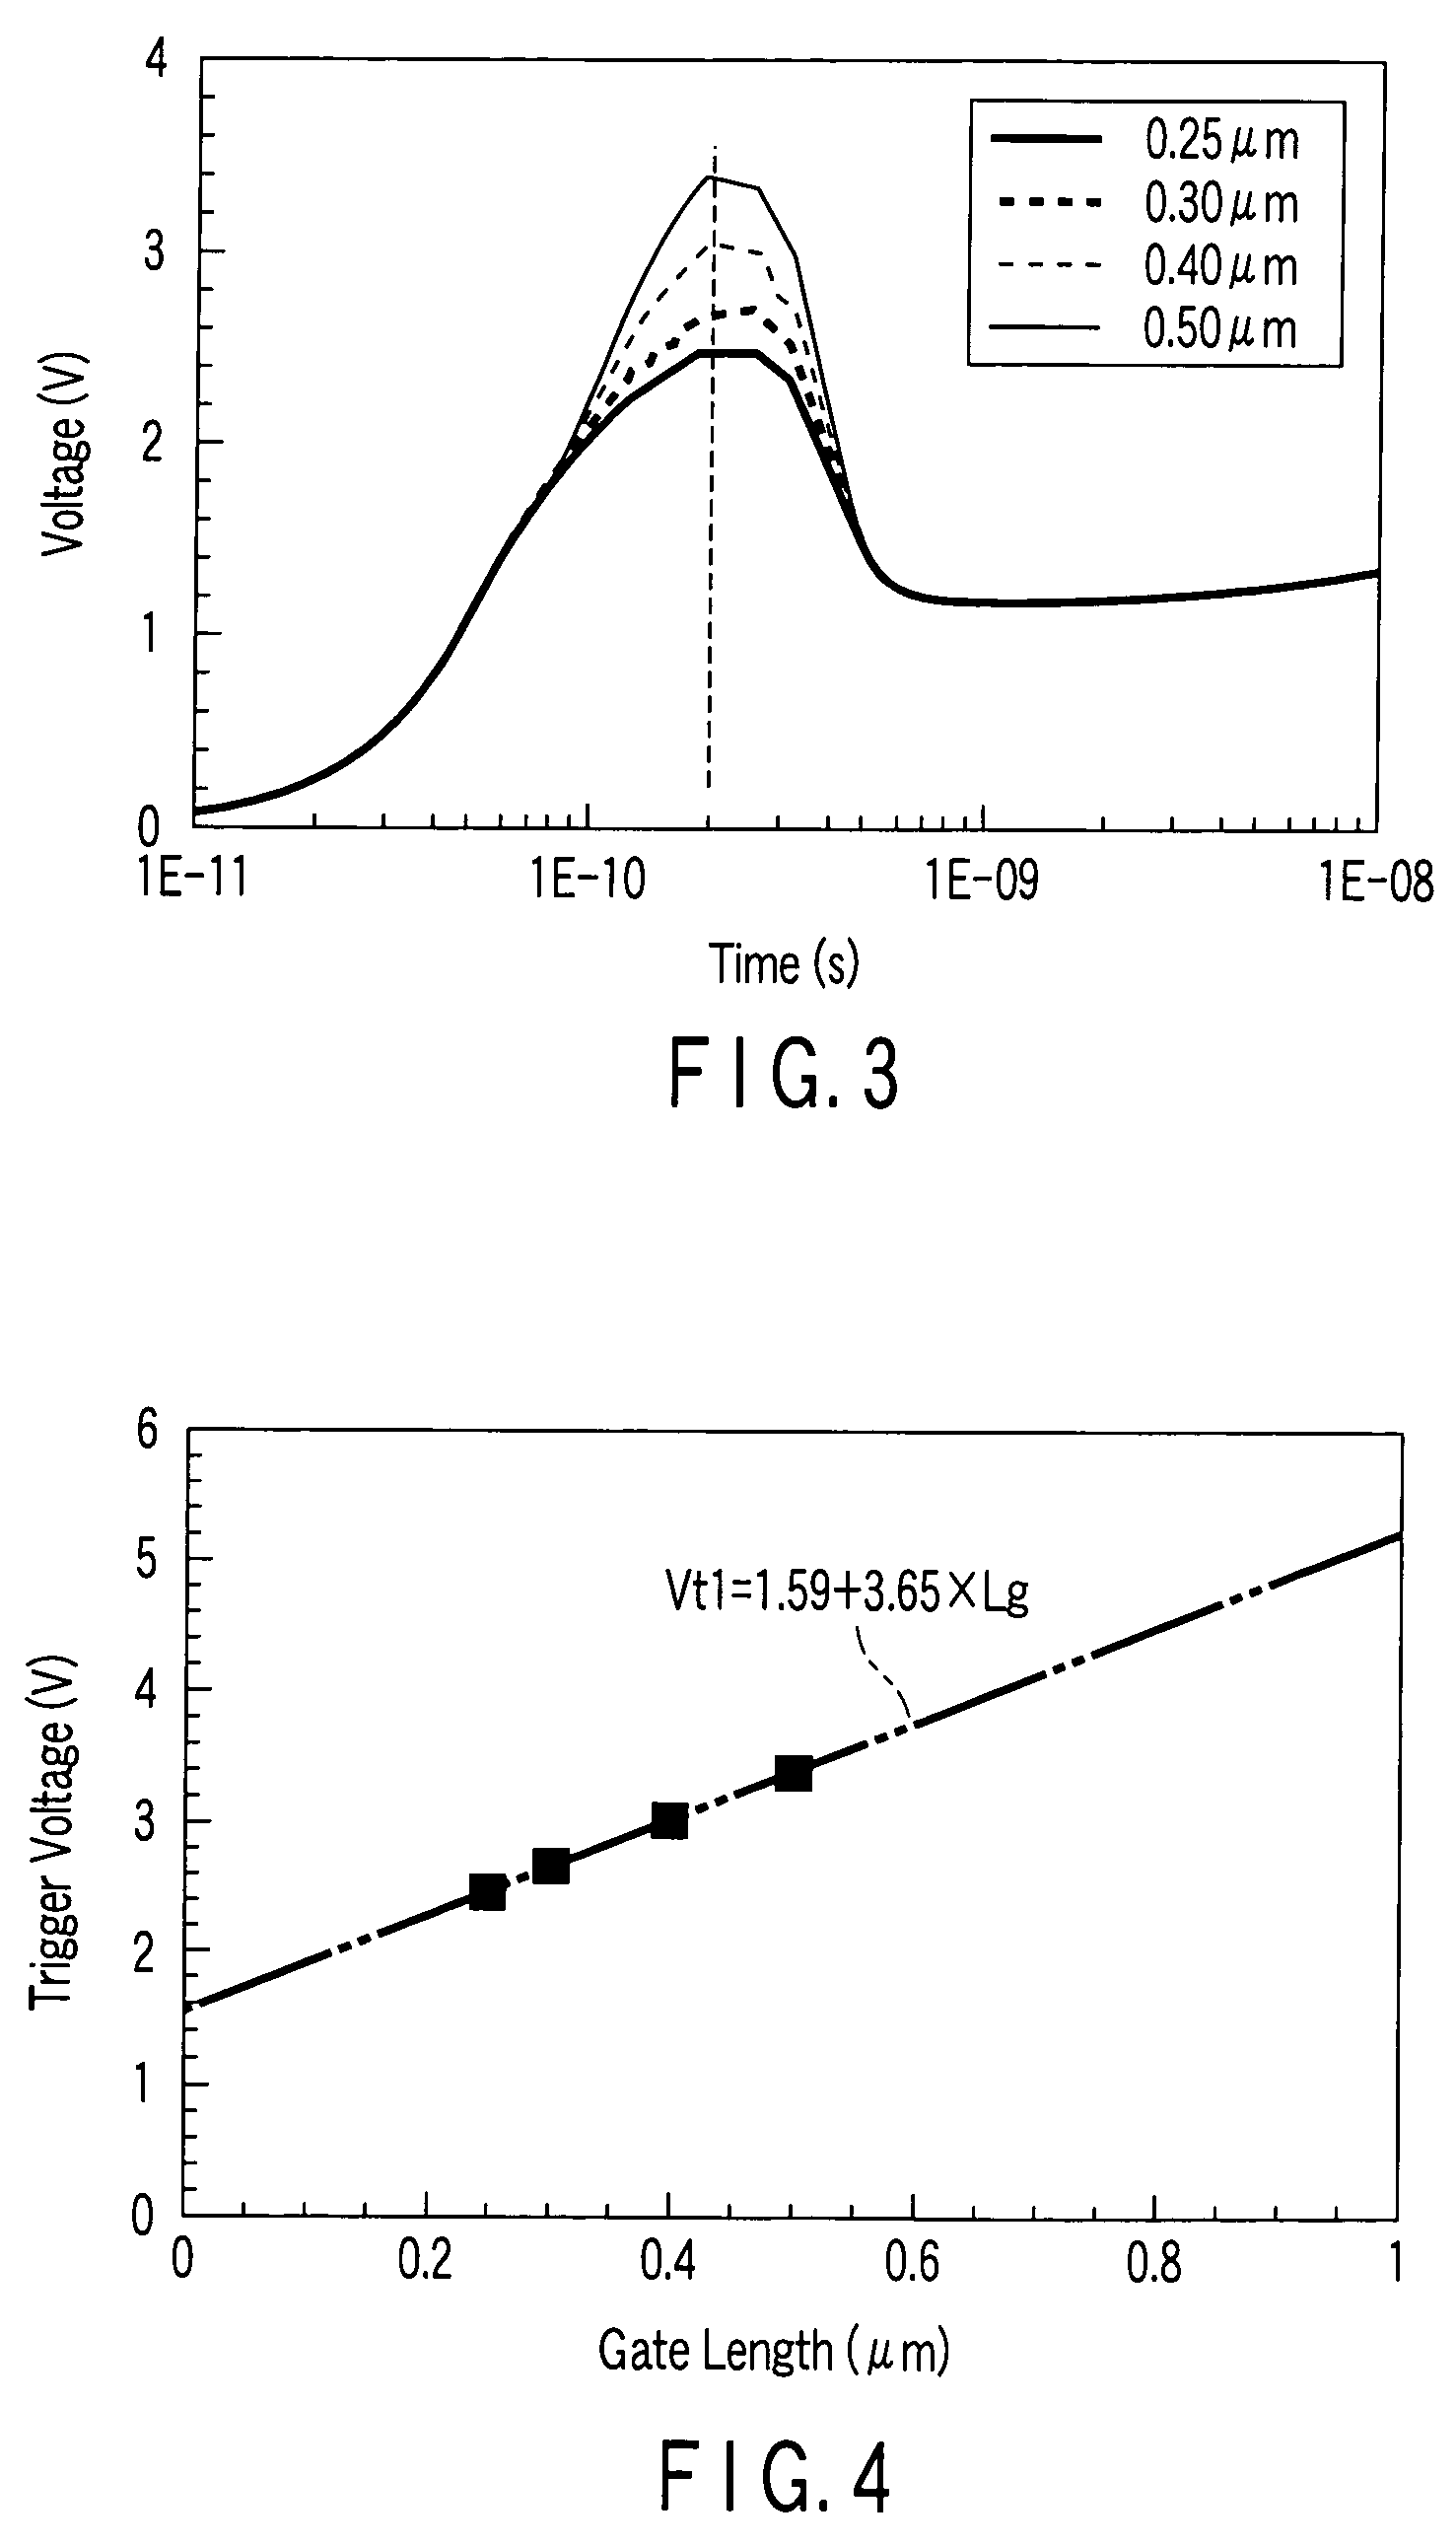 Semiconductor device including metal-oxide-silicon field-effect transistor as a trigger circuit